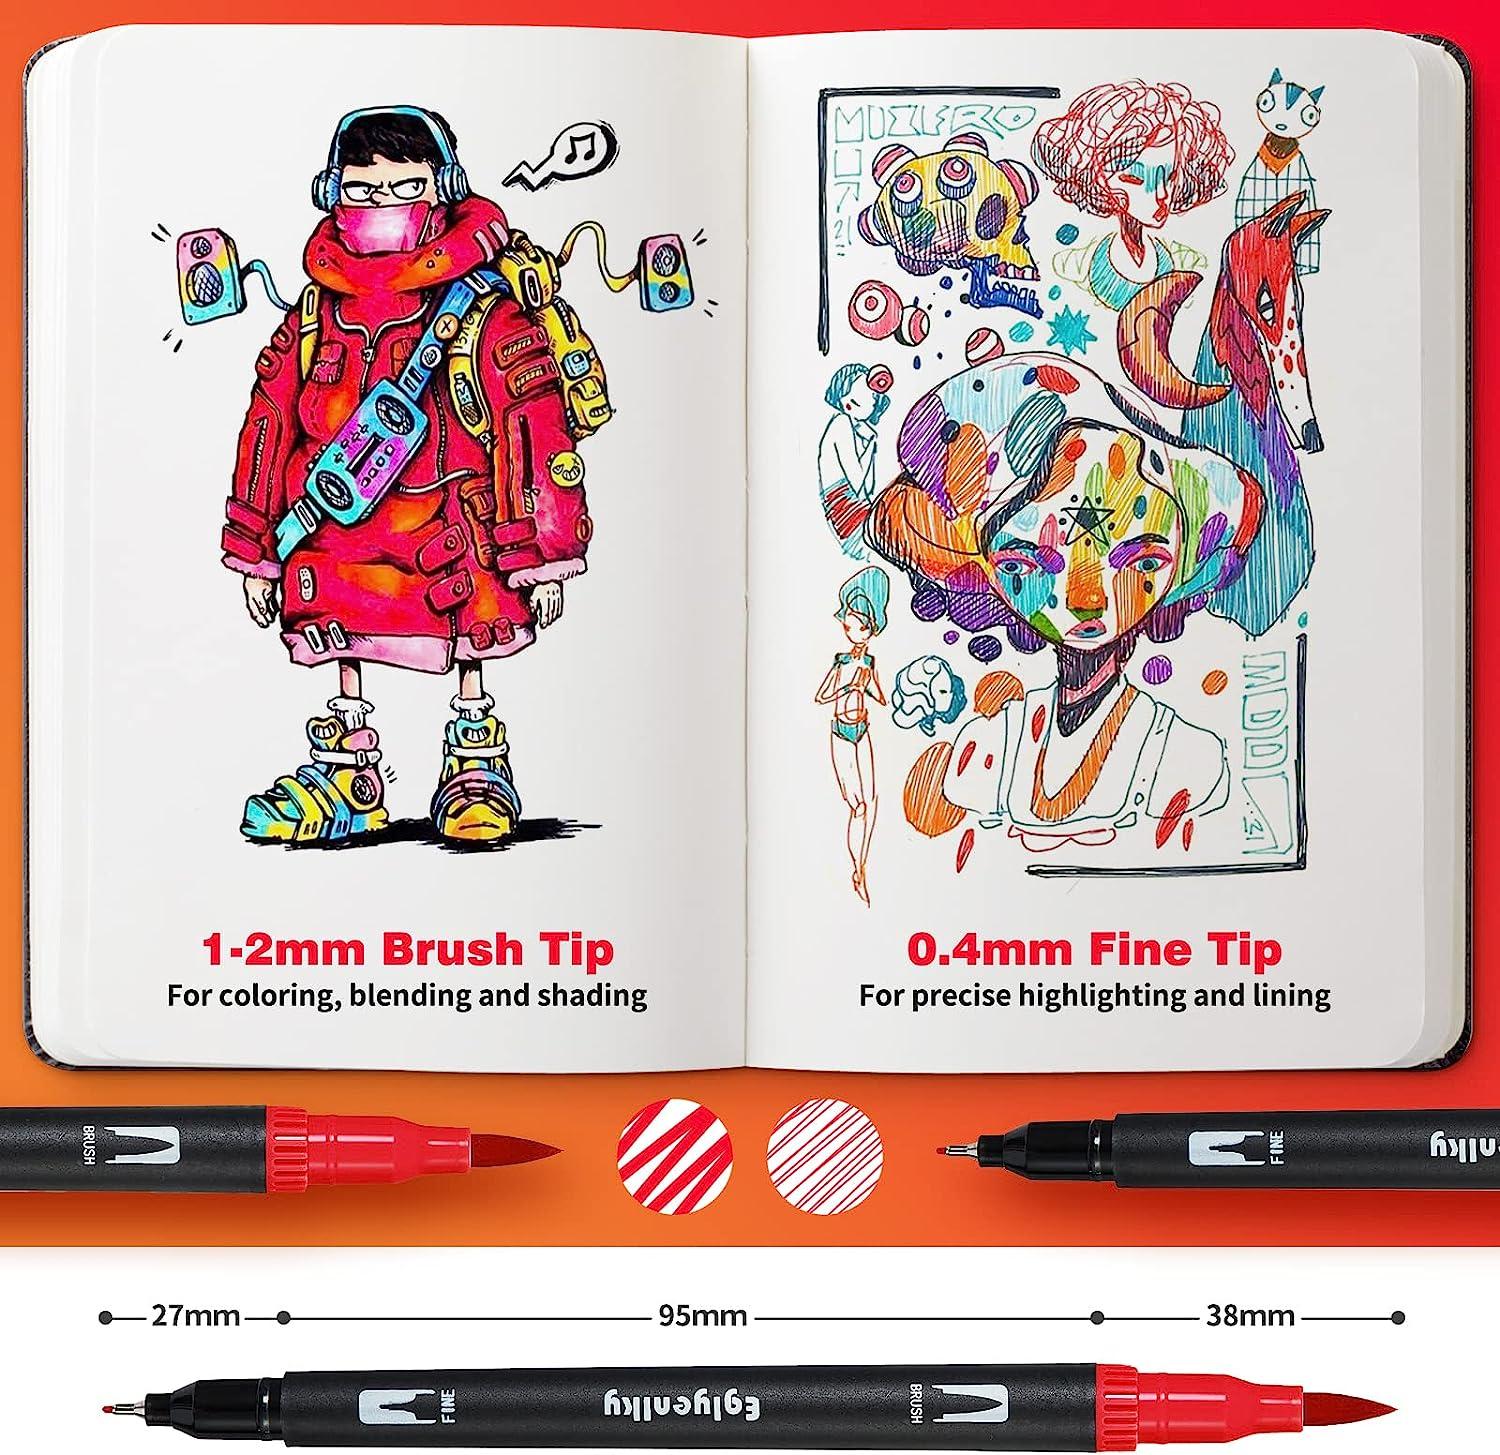 Eglyenlky 72 Markers Coloring Book for Adult, Dual Brush Marker Pens with Fine and Brush Tip for Kid Adult Artist Drawing Coloring Journaling